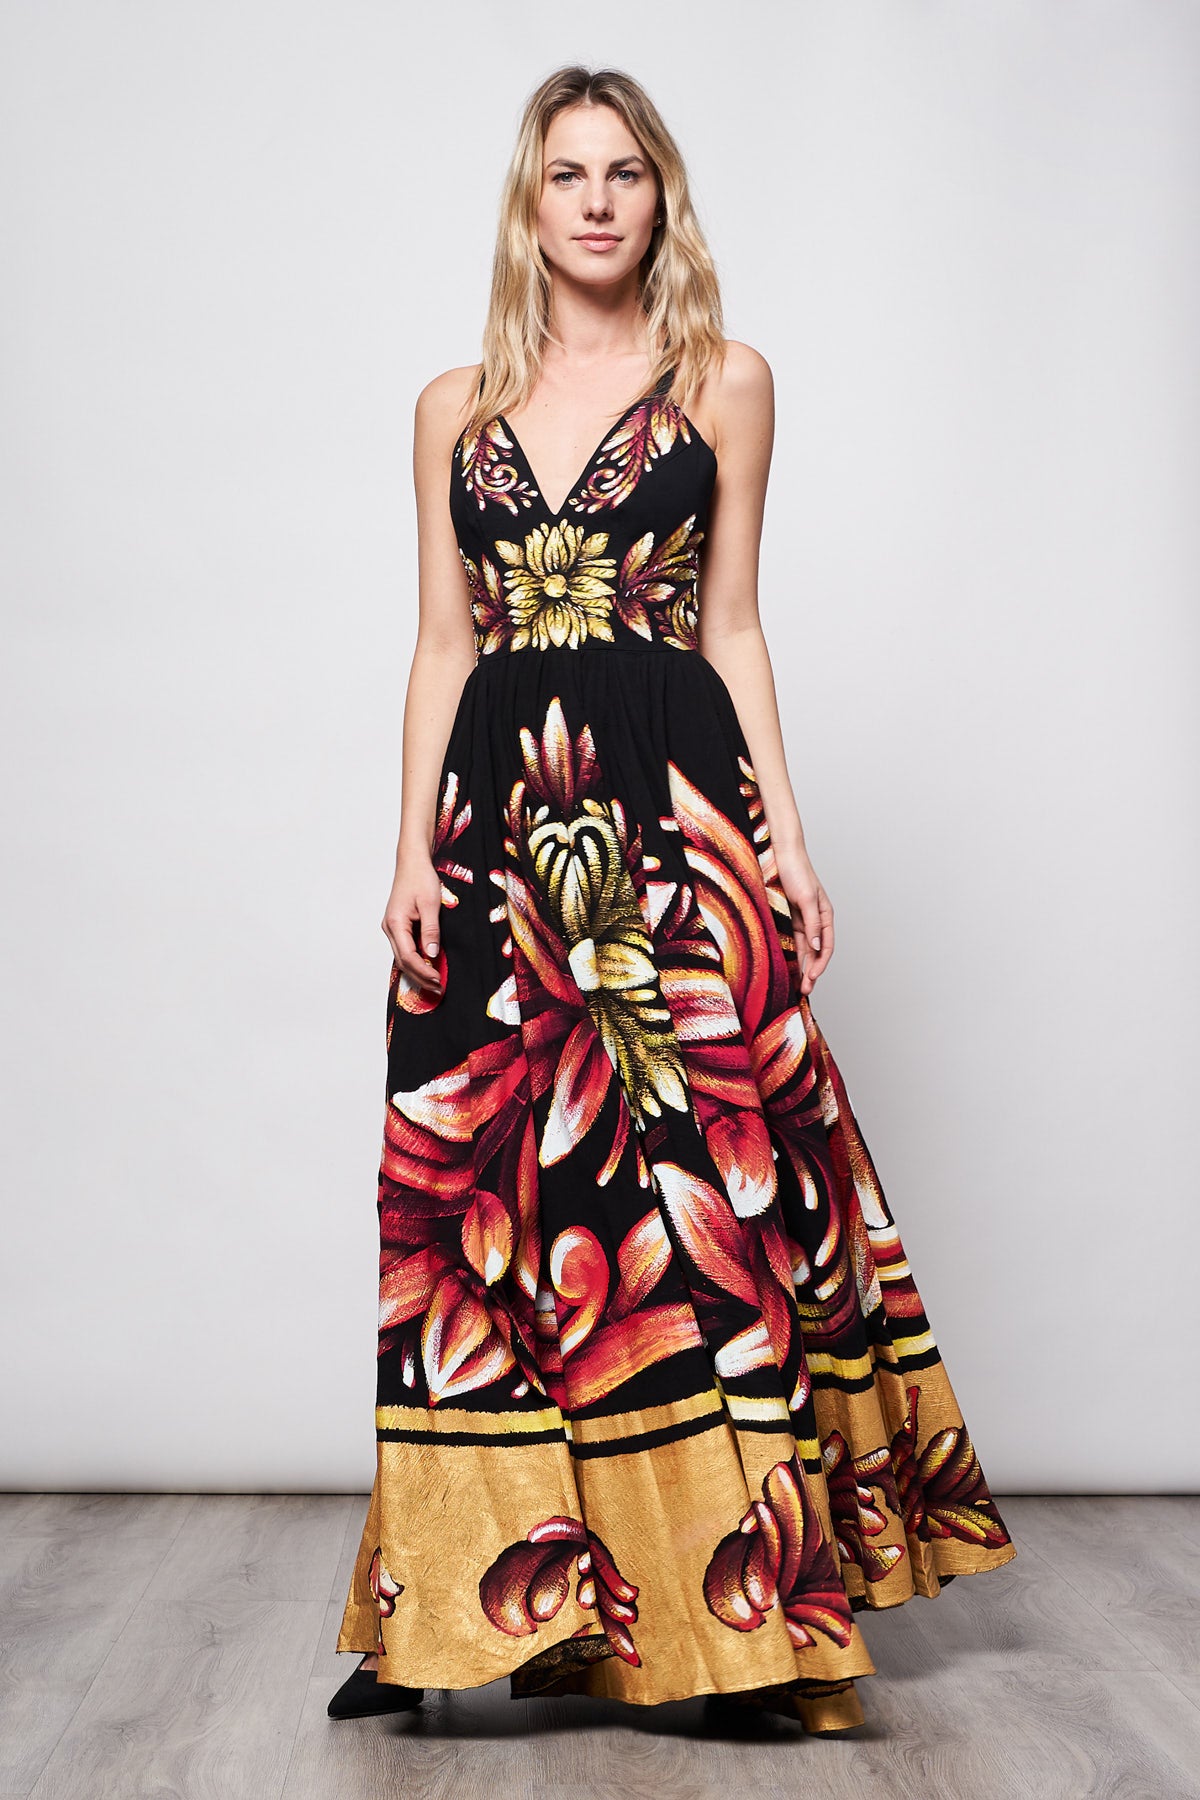 LONG DRESS V NECK HAND-PAINTED AND HAND-EMBROIDERED - TALAVERA BRONZE